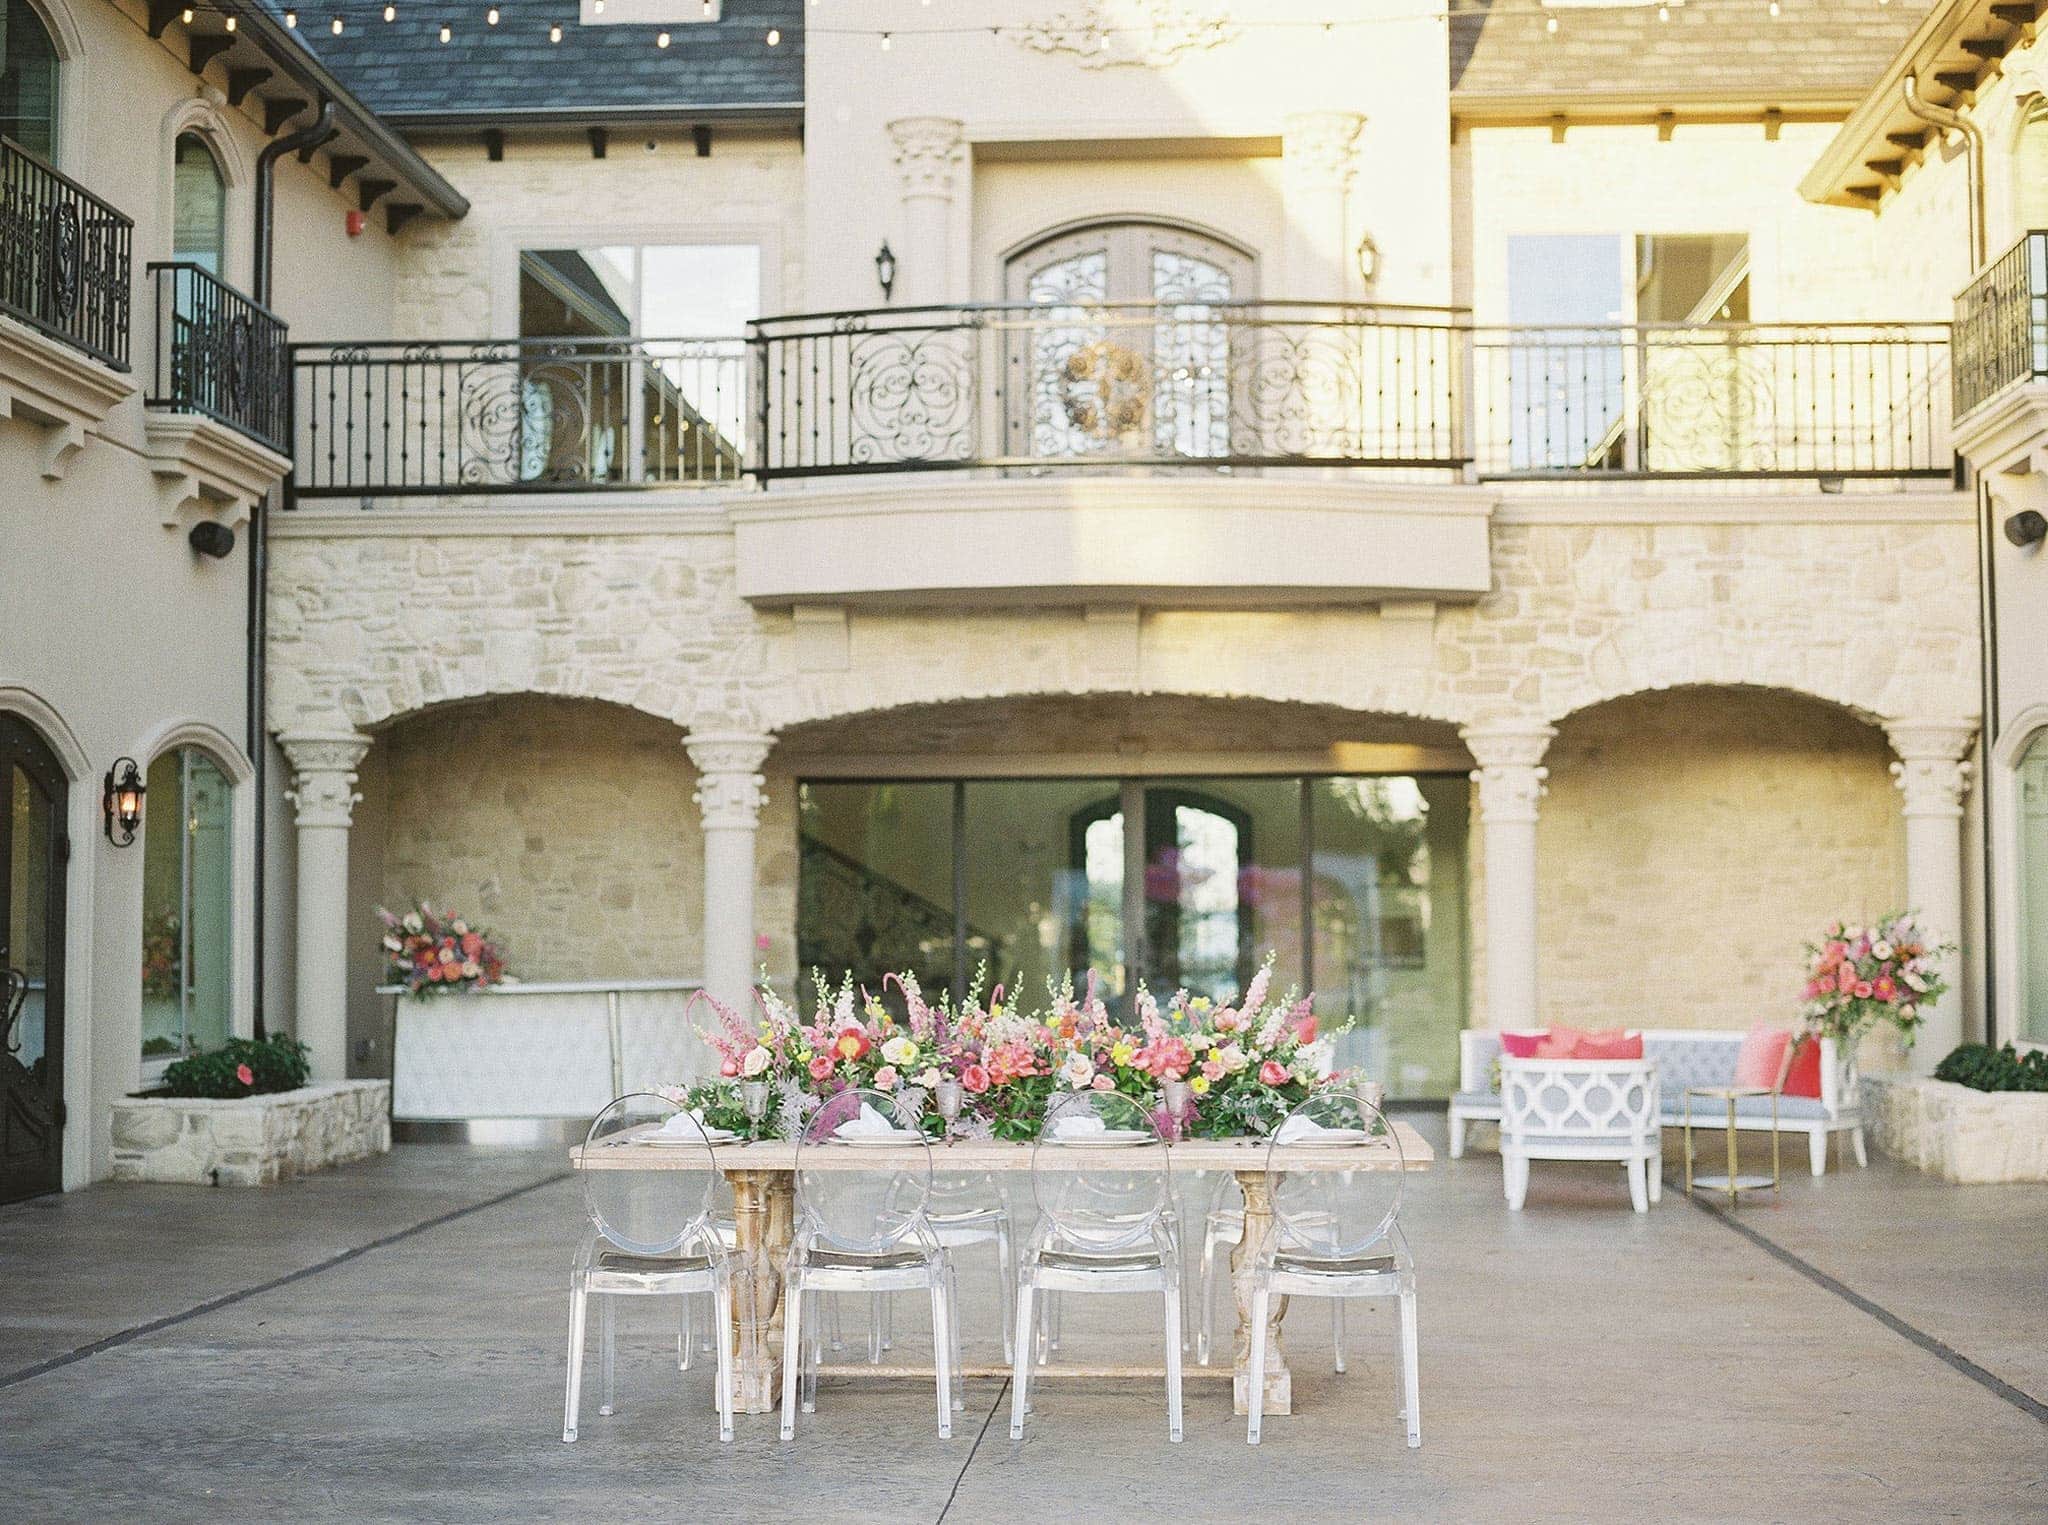 Ghost Arm Chairs and Tuscany Table with Flowers